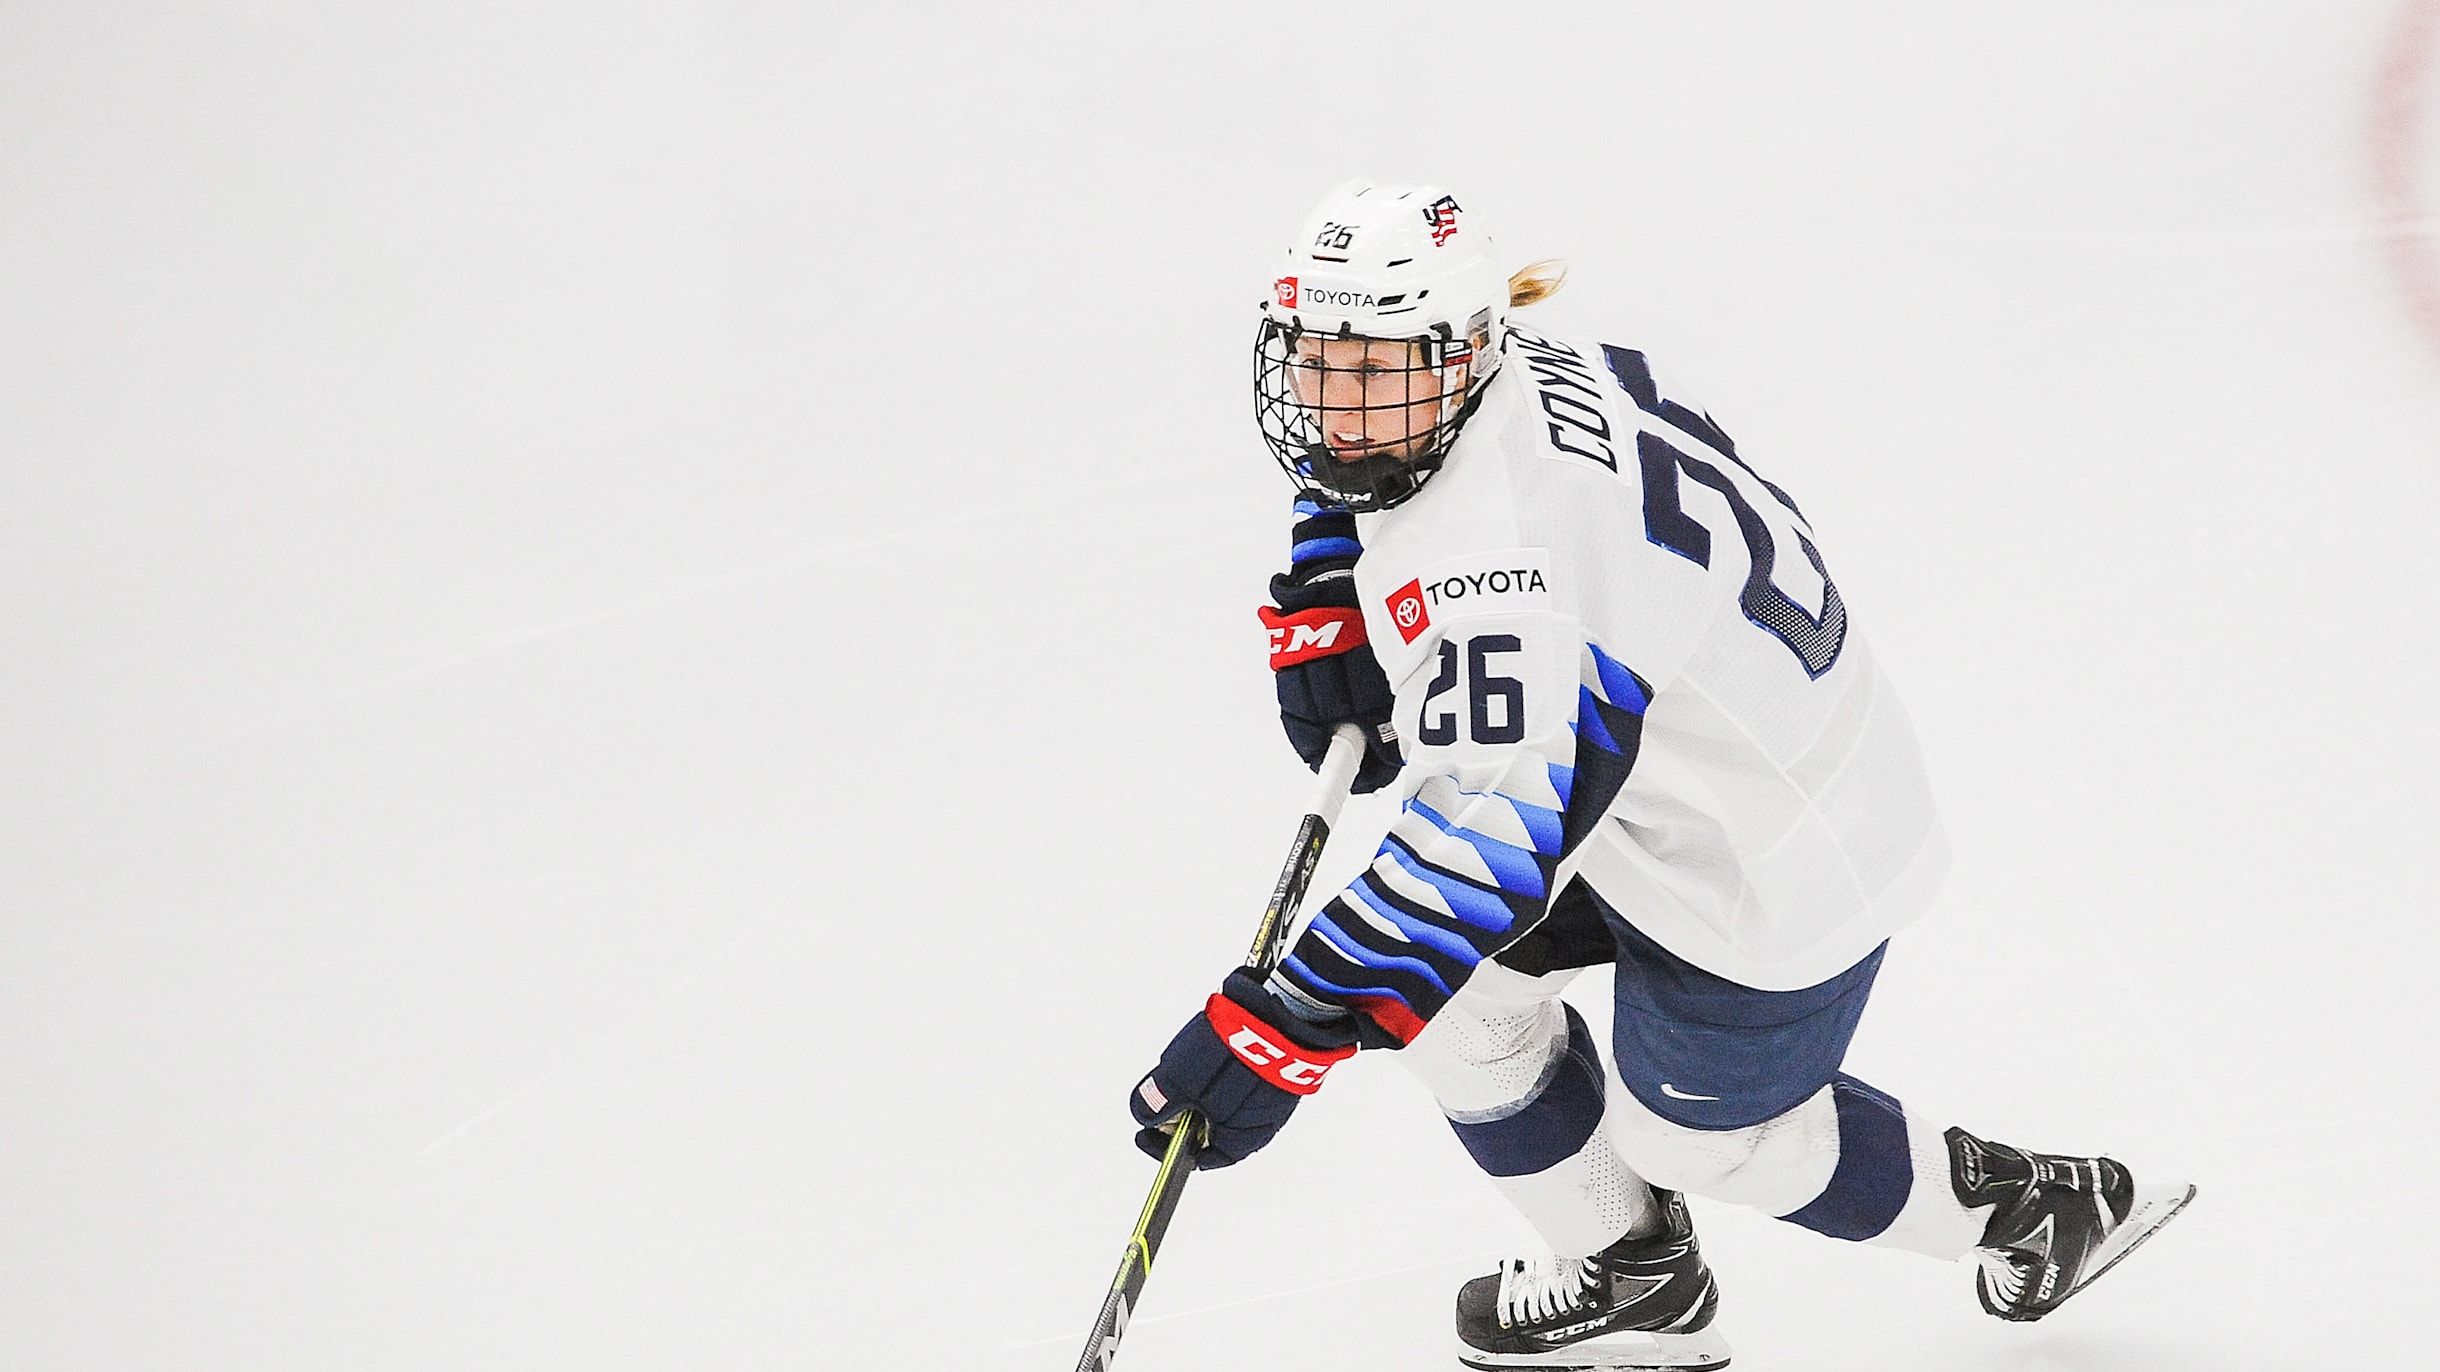 US women's hockey team strike 'historic' pay deal and agree to end boycott, US sports